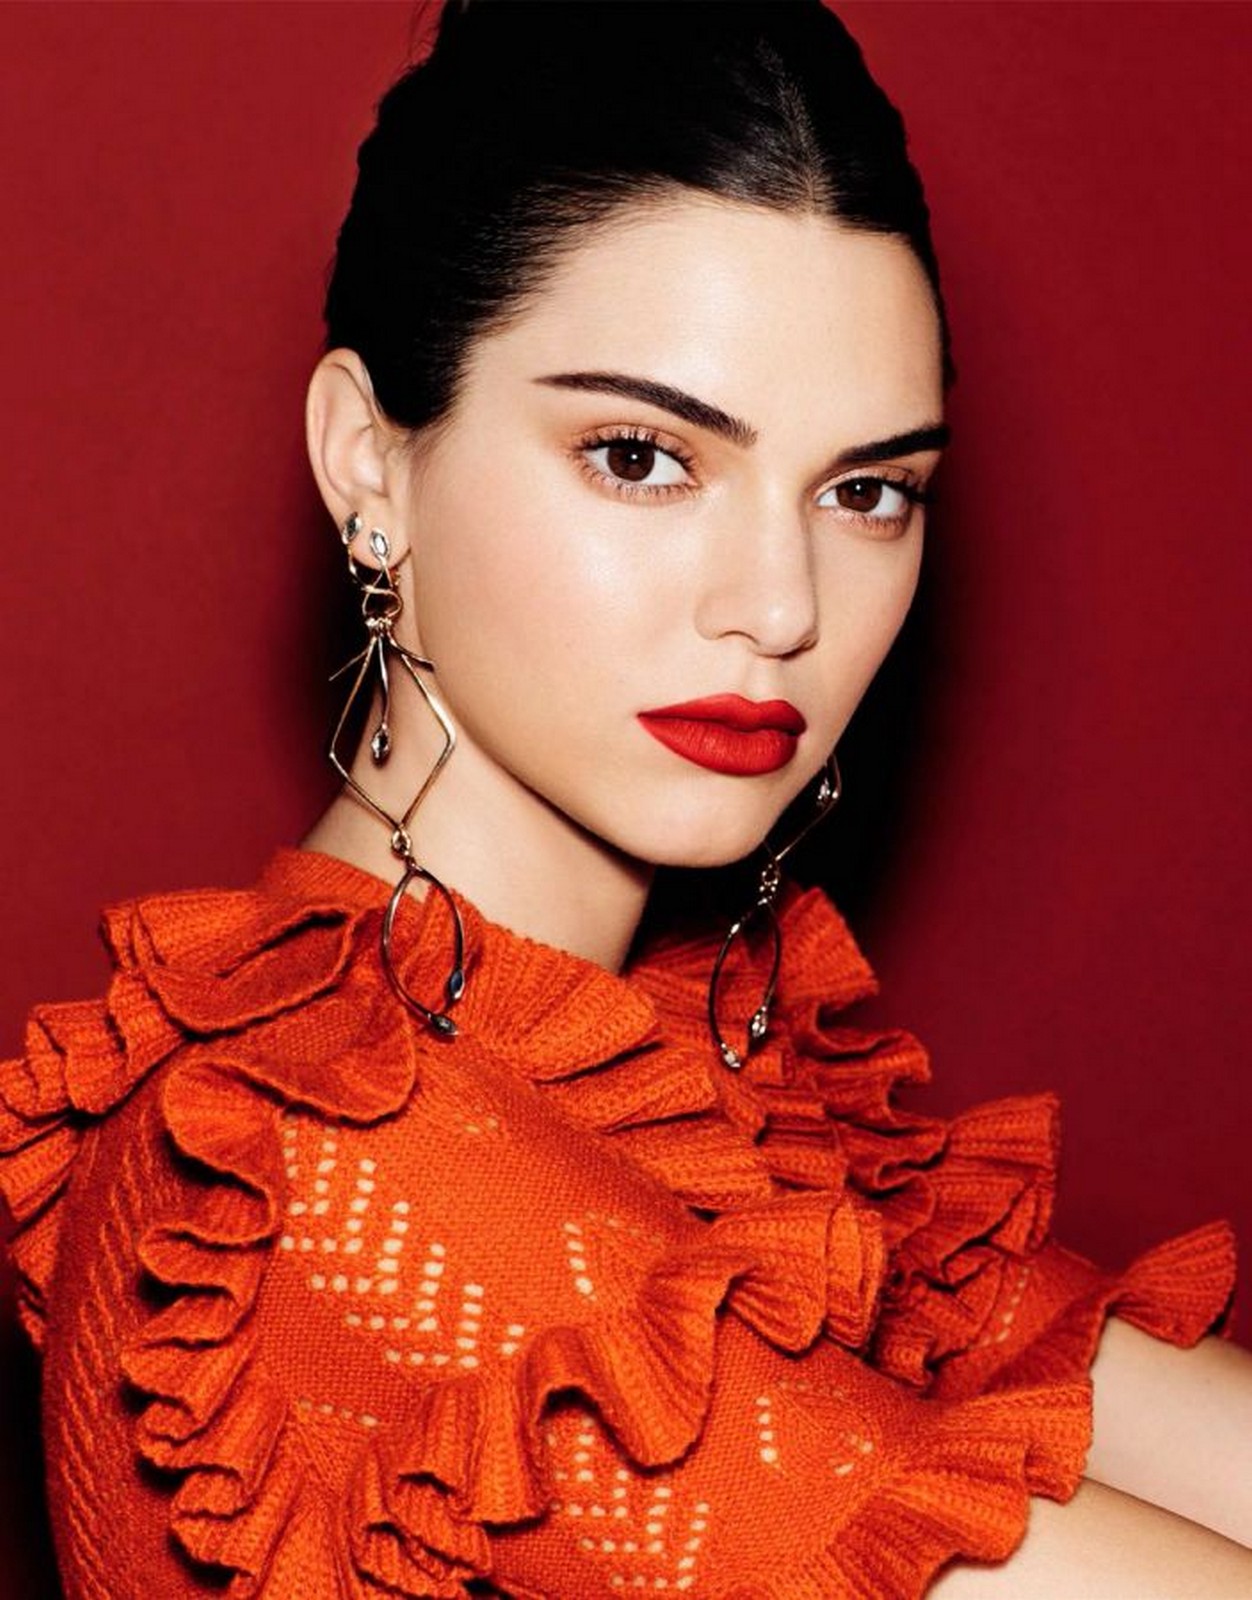 Kendall Jenner Photo Gallery 017b | Kendall Jenner Fans Site